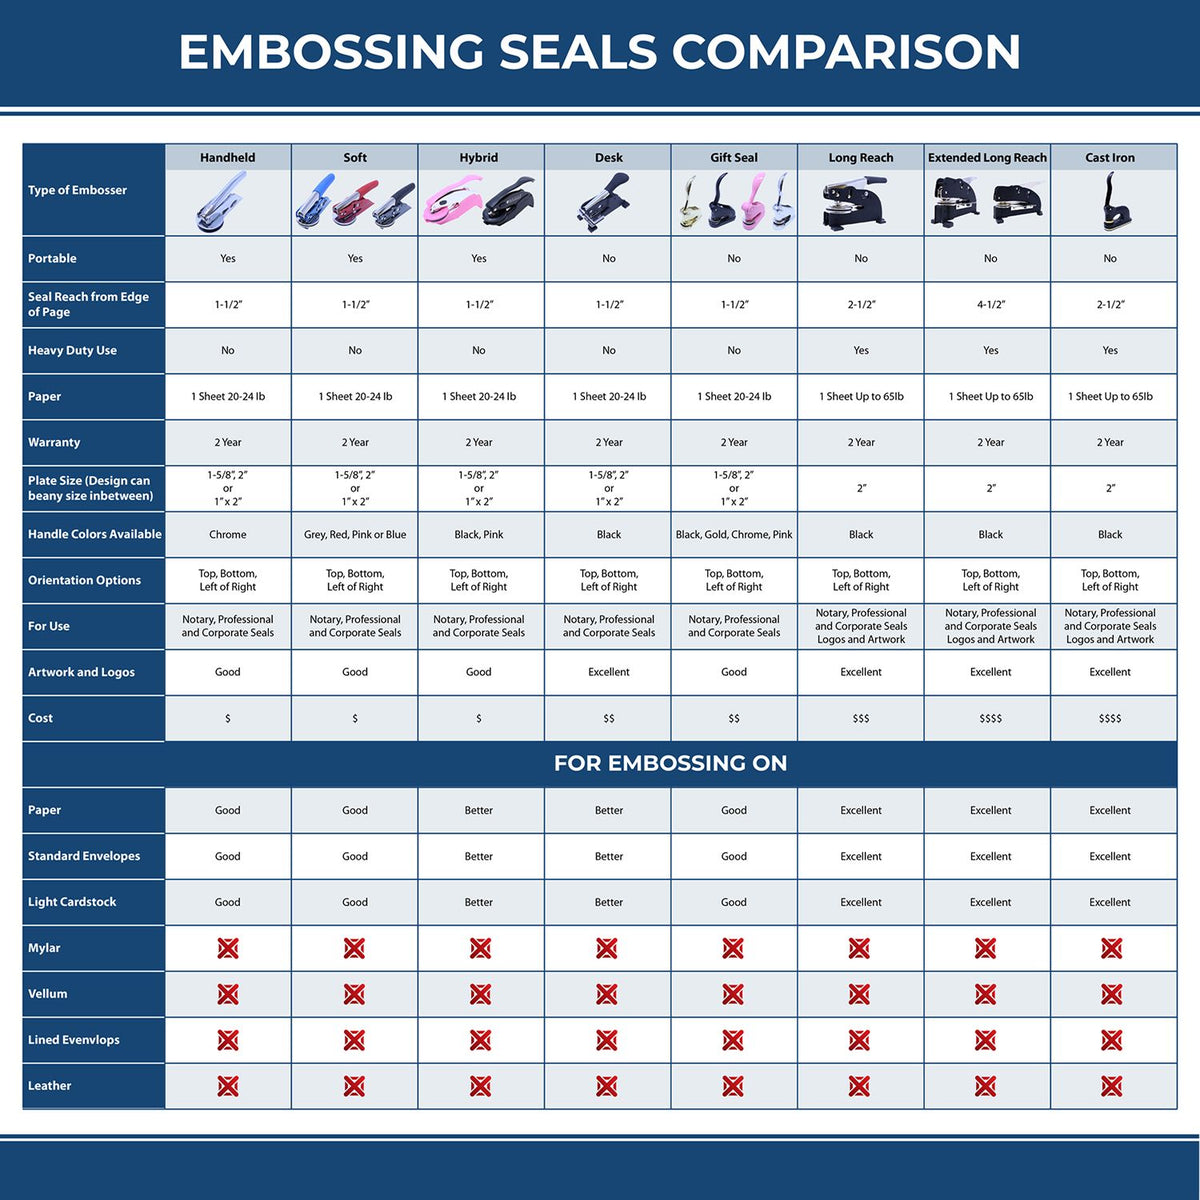 A comparison chart for the different types of mount models available for the Heavy Duty Cast Iron Arkansas Geologist Seal Embosser